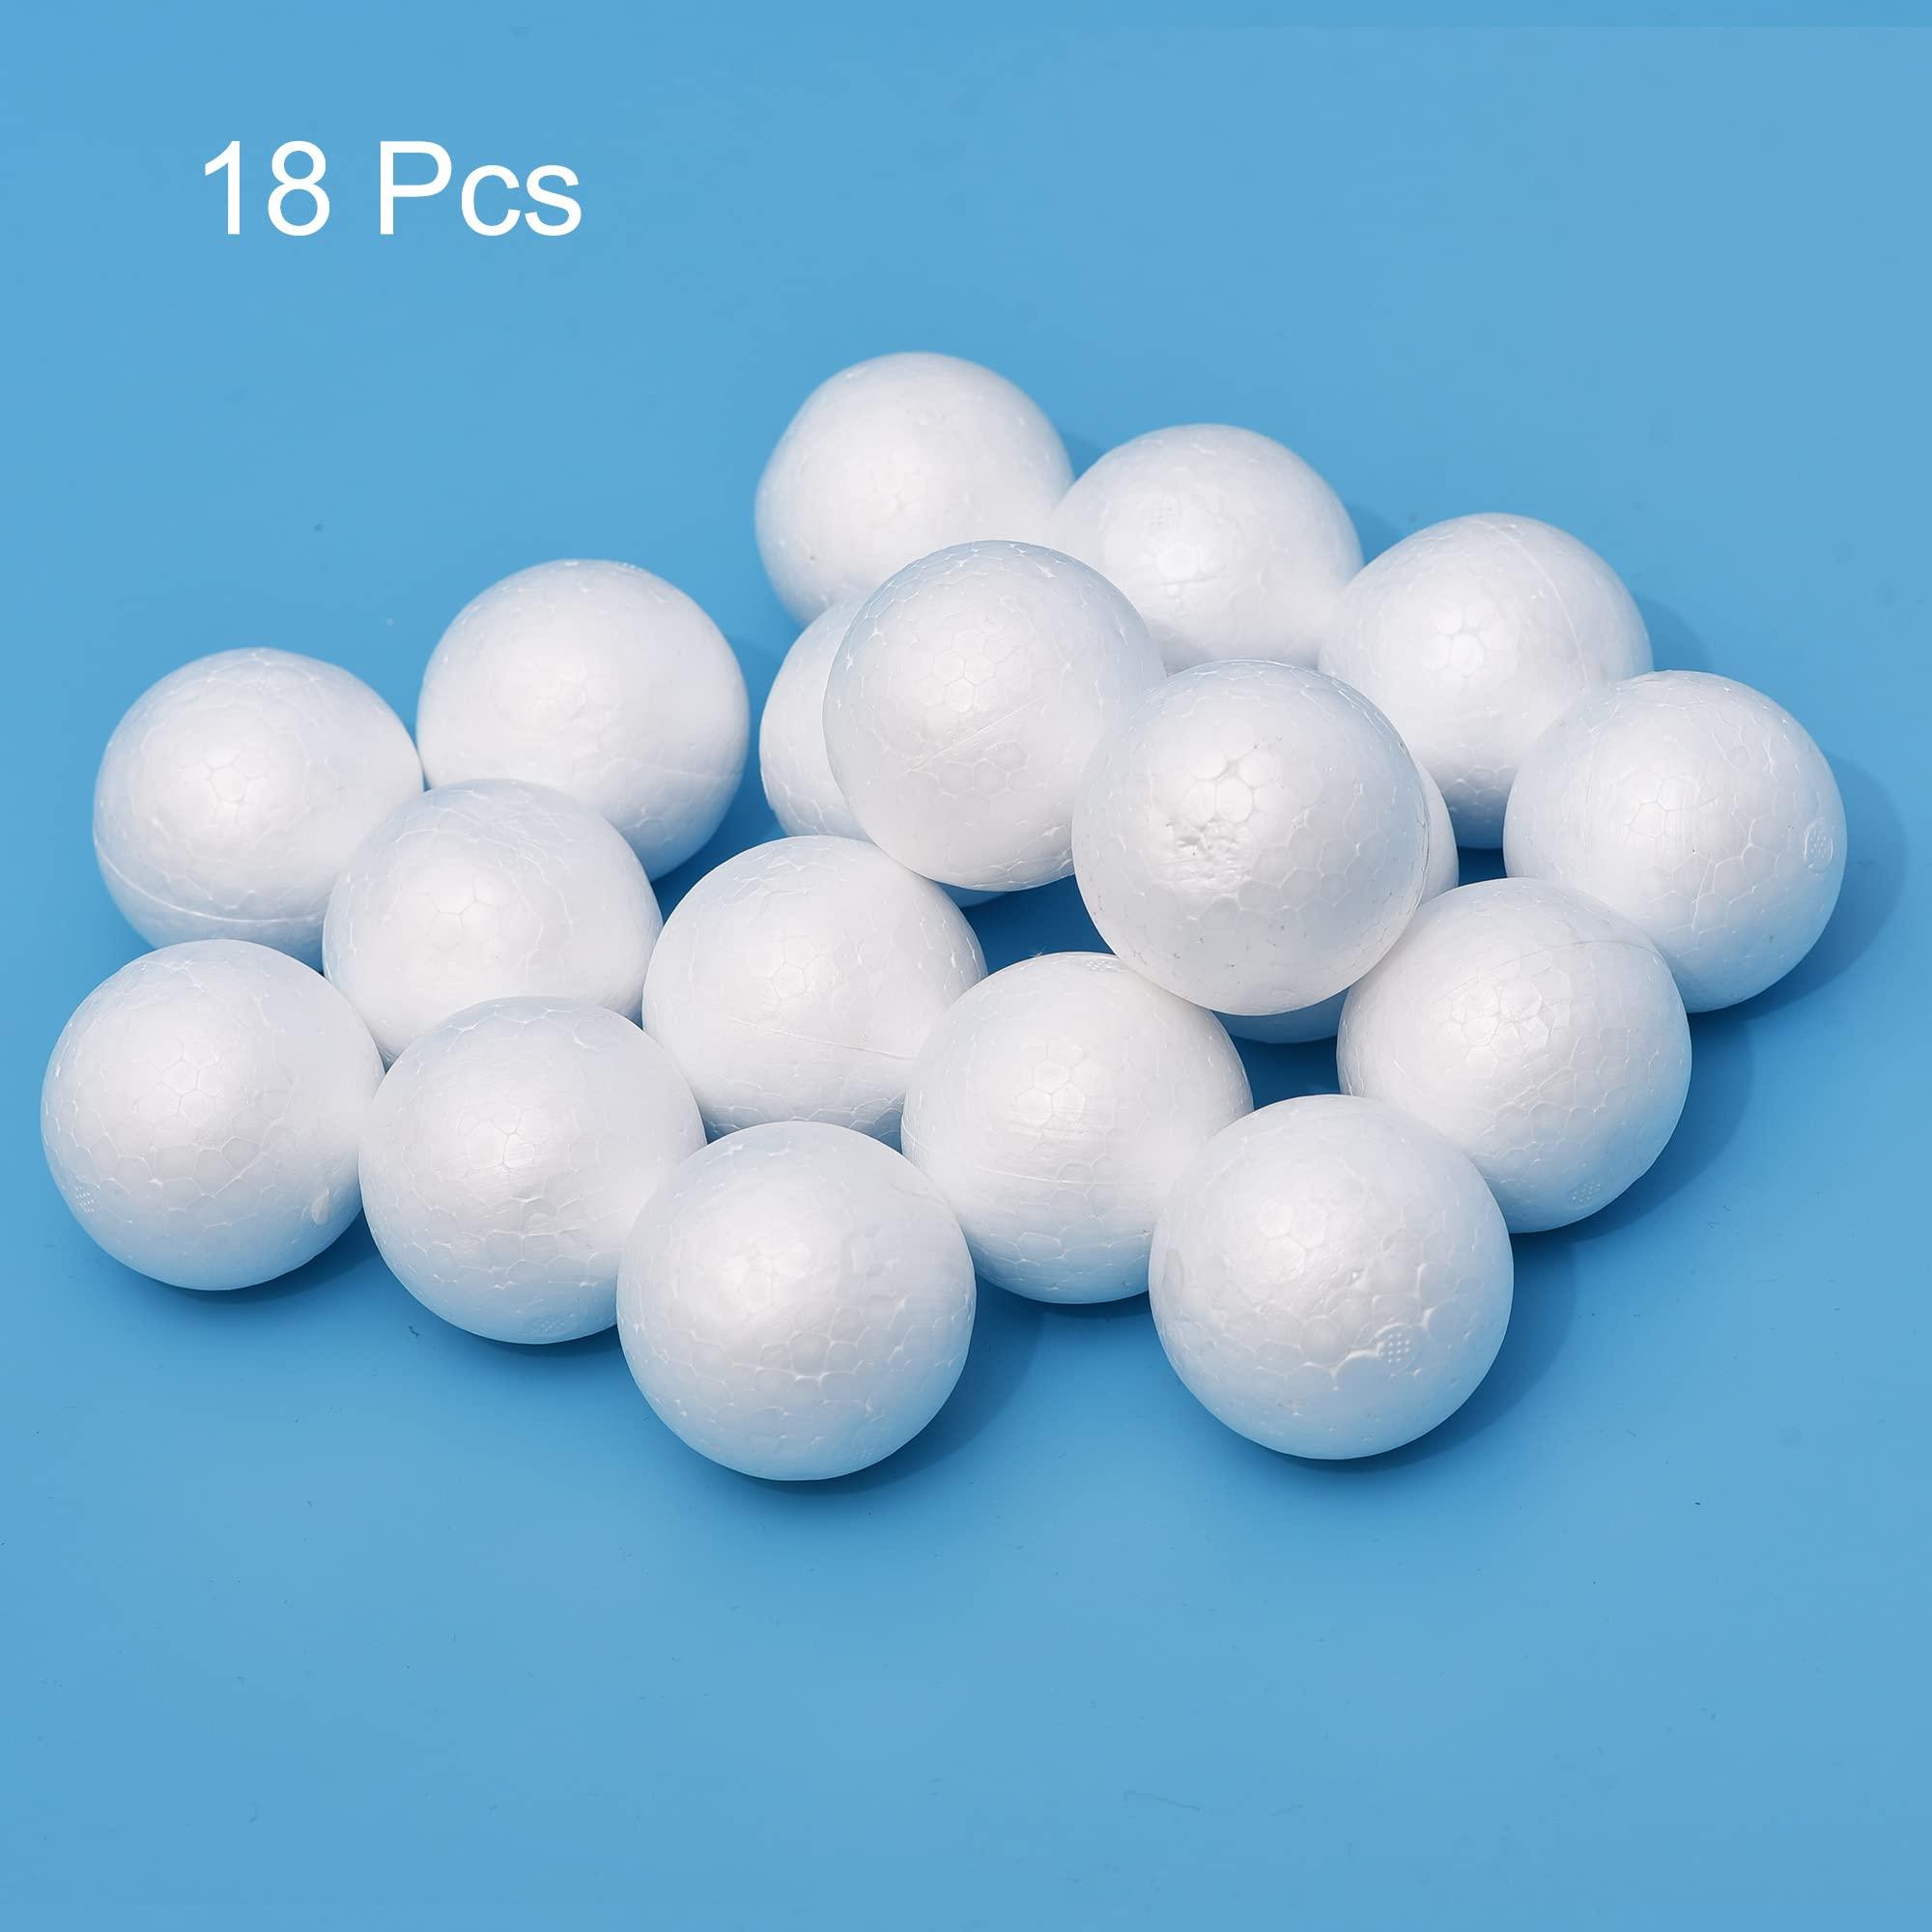 sourcing map 18Pcs 2.35" White Polystyrene Foam Balls Smooth Round Solid Ball for Crafts, Art, DIY, Household, Party Decorations 1